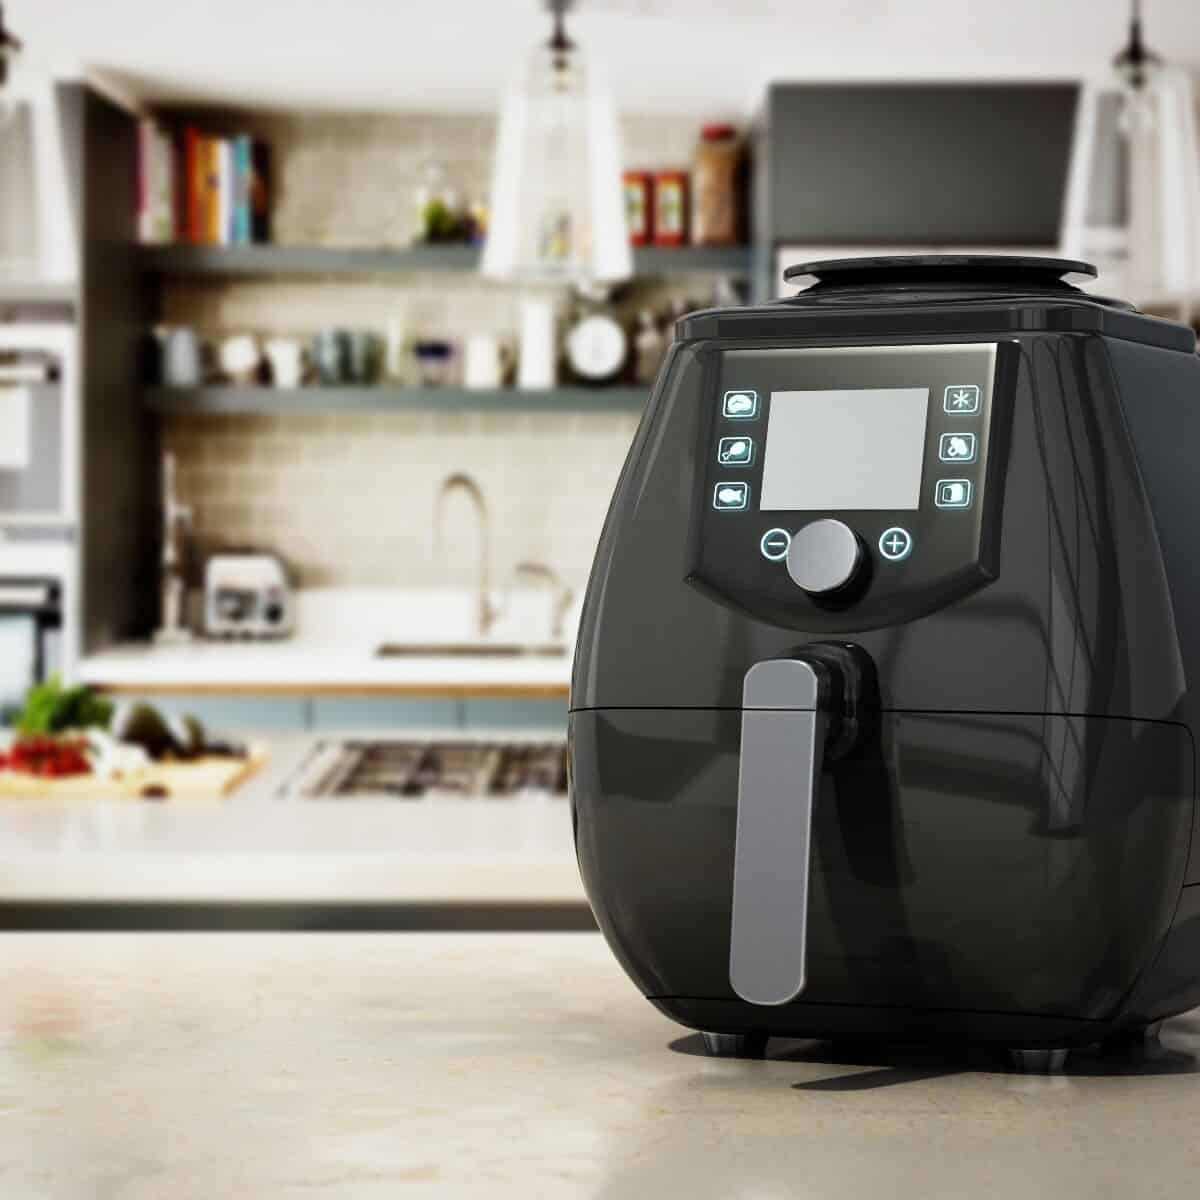 Air Fryer and a Microwave Oven